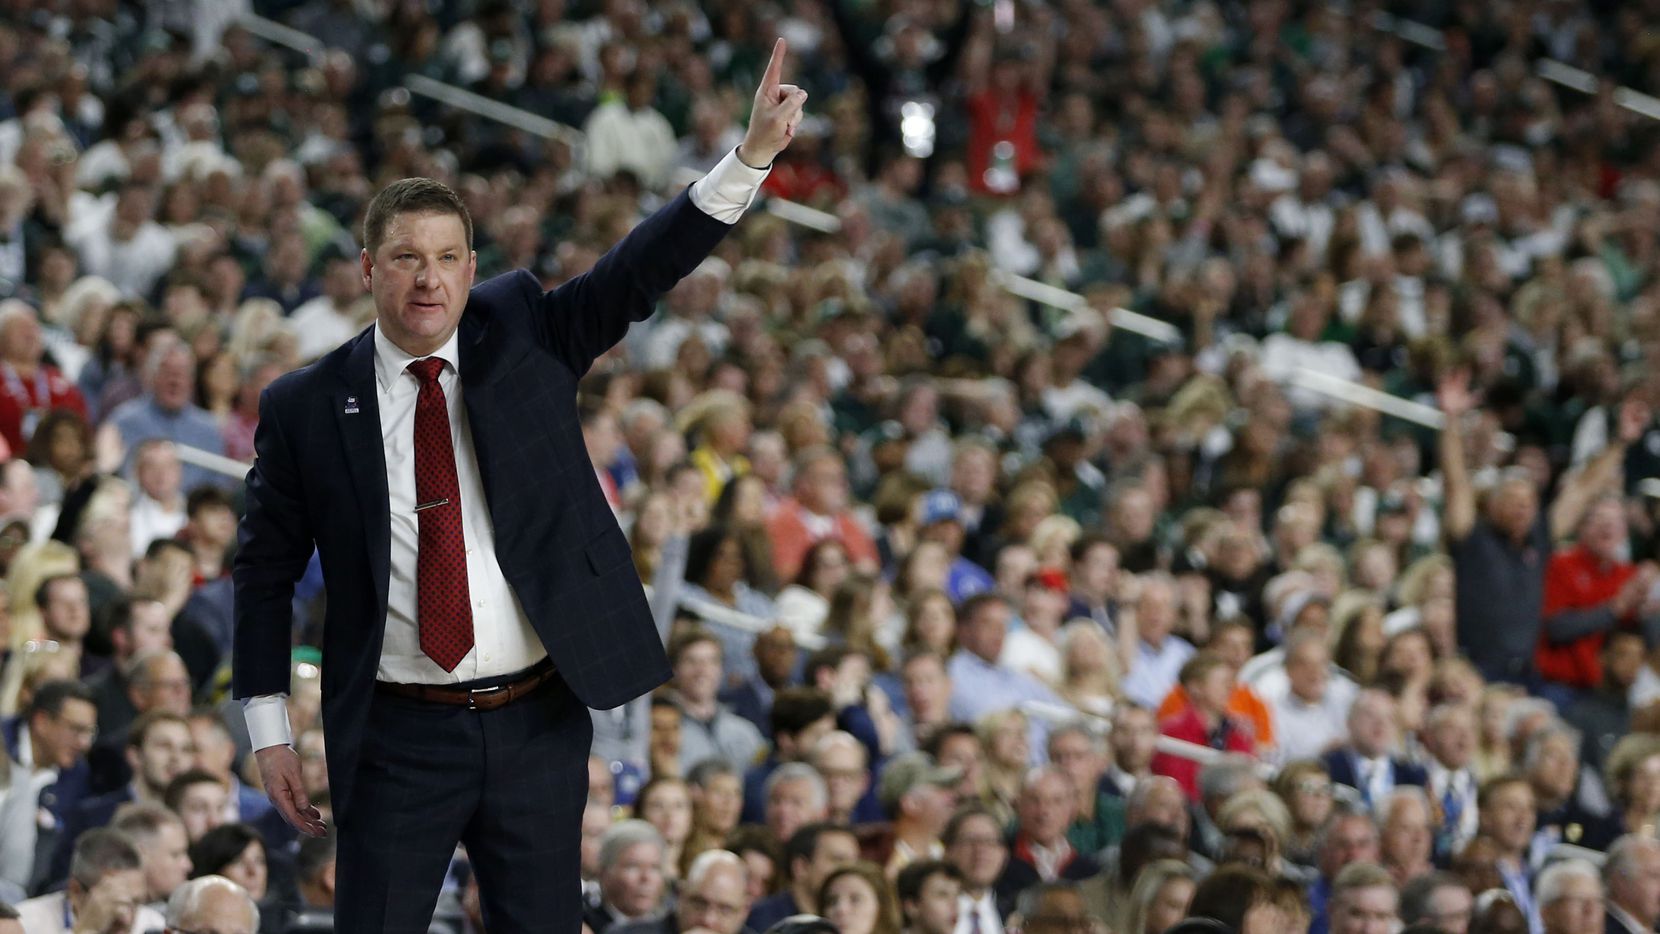 Texas Tech Red Raiders head coach Chris Beard communicates to his players in a game against the Michigan State Spartans during the second half of play in the semifinals of the Final Four NCAA college basketball tournament at U.S. Bank Stadium in Minneapolis on Saturday, April 6, 2019. Texas Tech Red Raiders defeated the Michigan State Spartans 61-51.